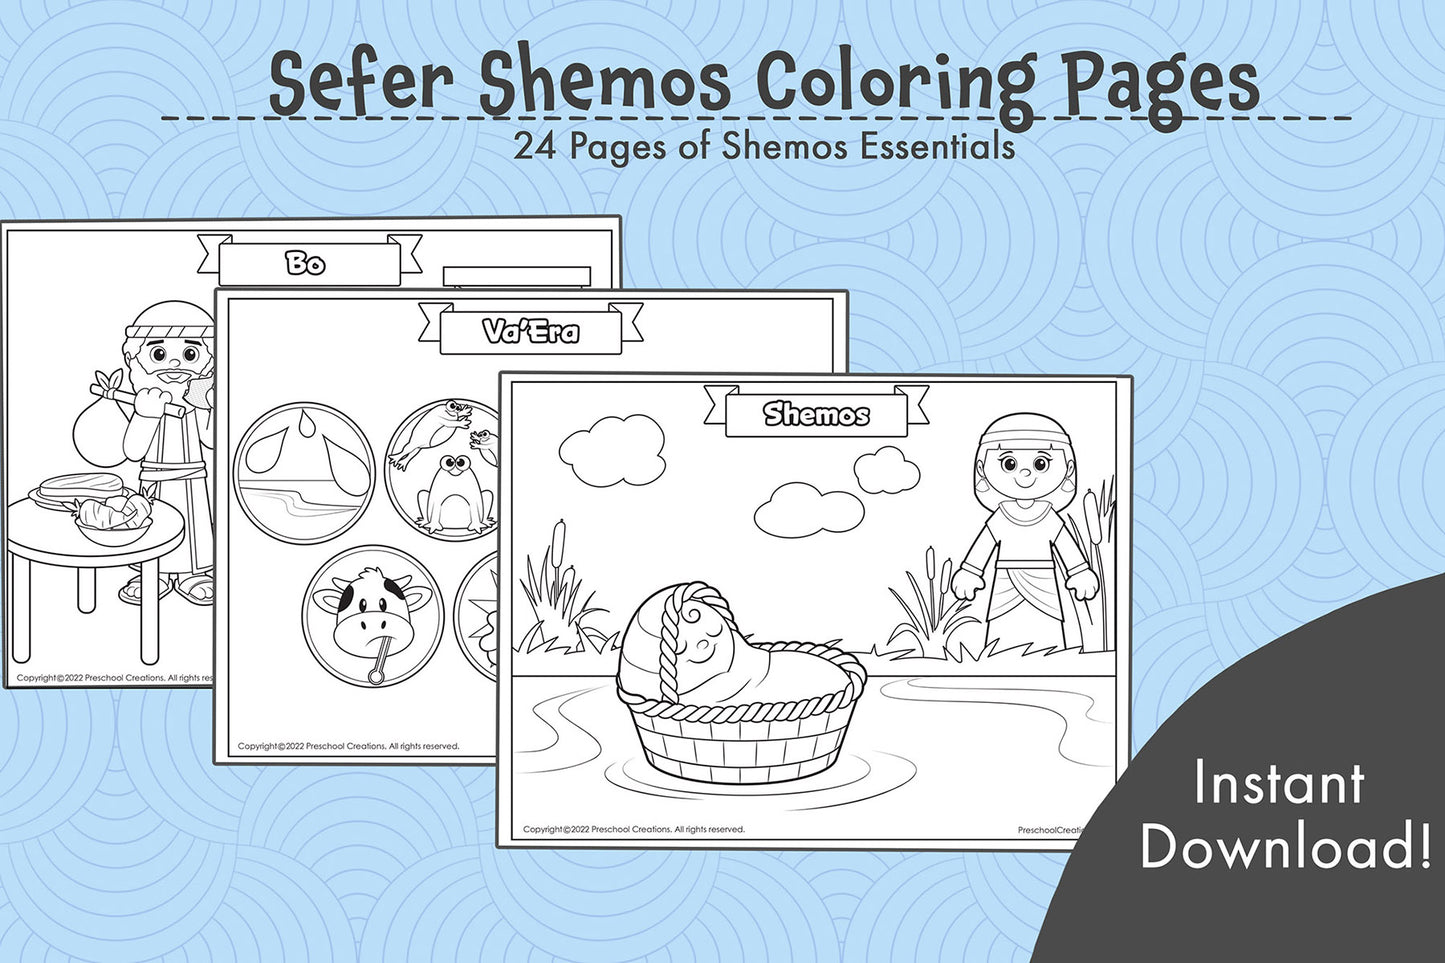 Adorable and whimsical coloring sheets for the book of sefer shemos. Including the slavery in Egypt, the 10 plagues, Moses Moshe and Aharon, splitting of the sea, giving of the Torah and 10 commandments, and the mishkan!. Enhance your preschool classroom with these beautiful coloring pages for the book of sefer shemot!